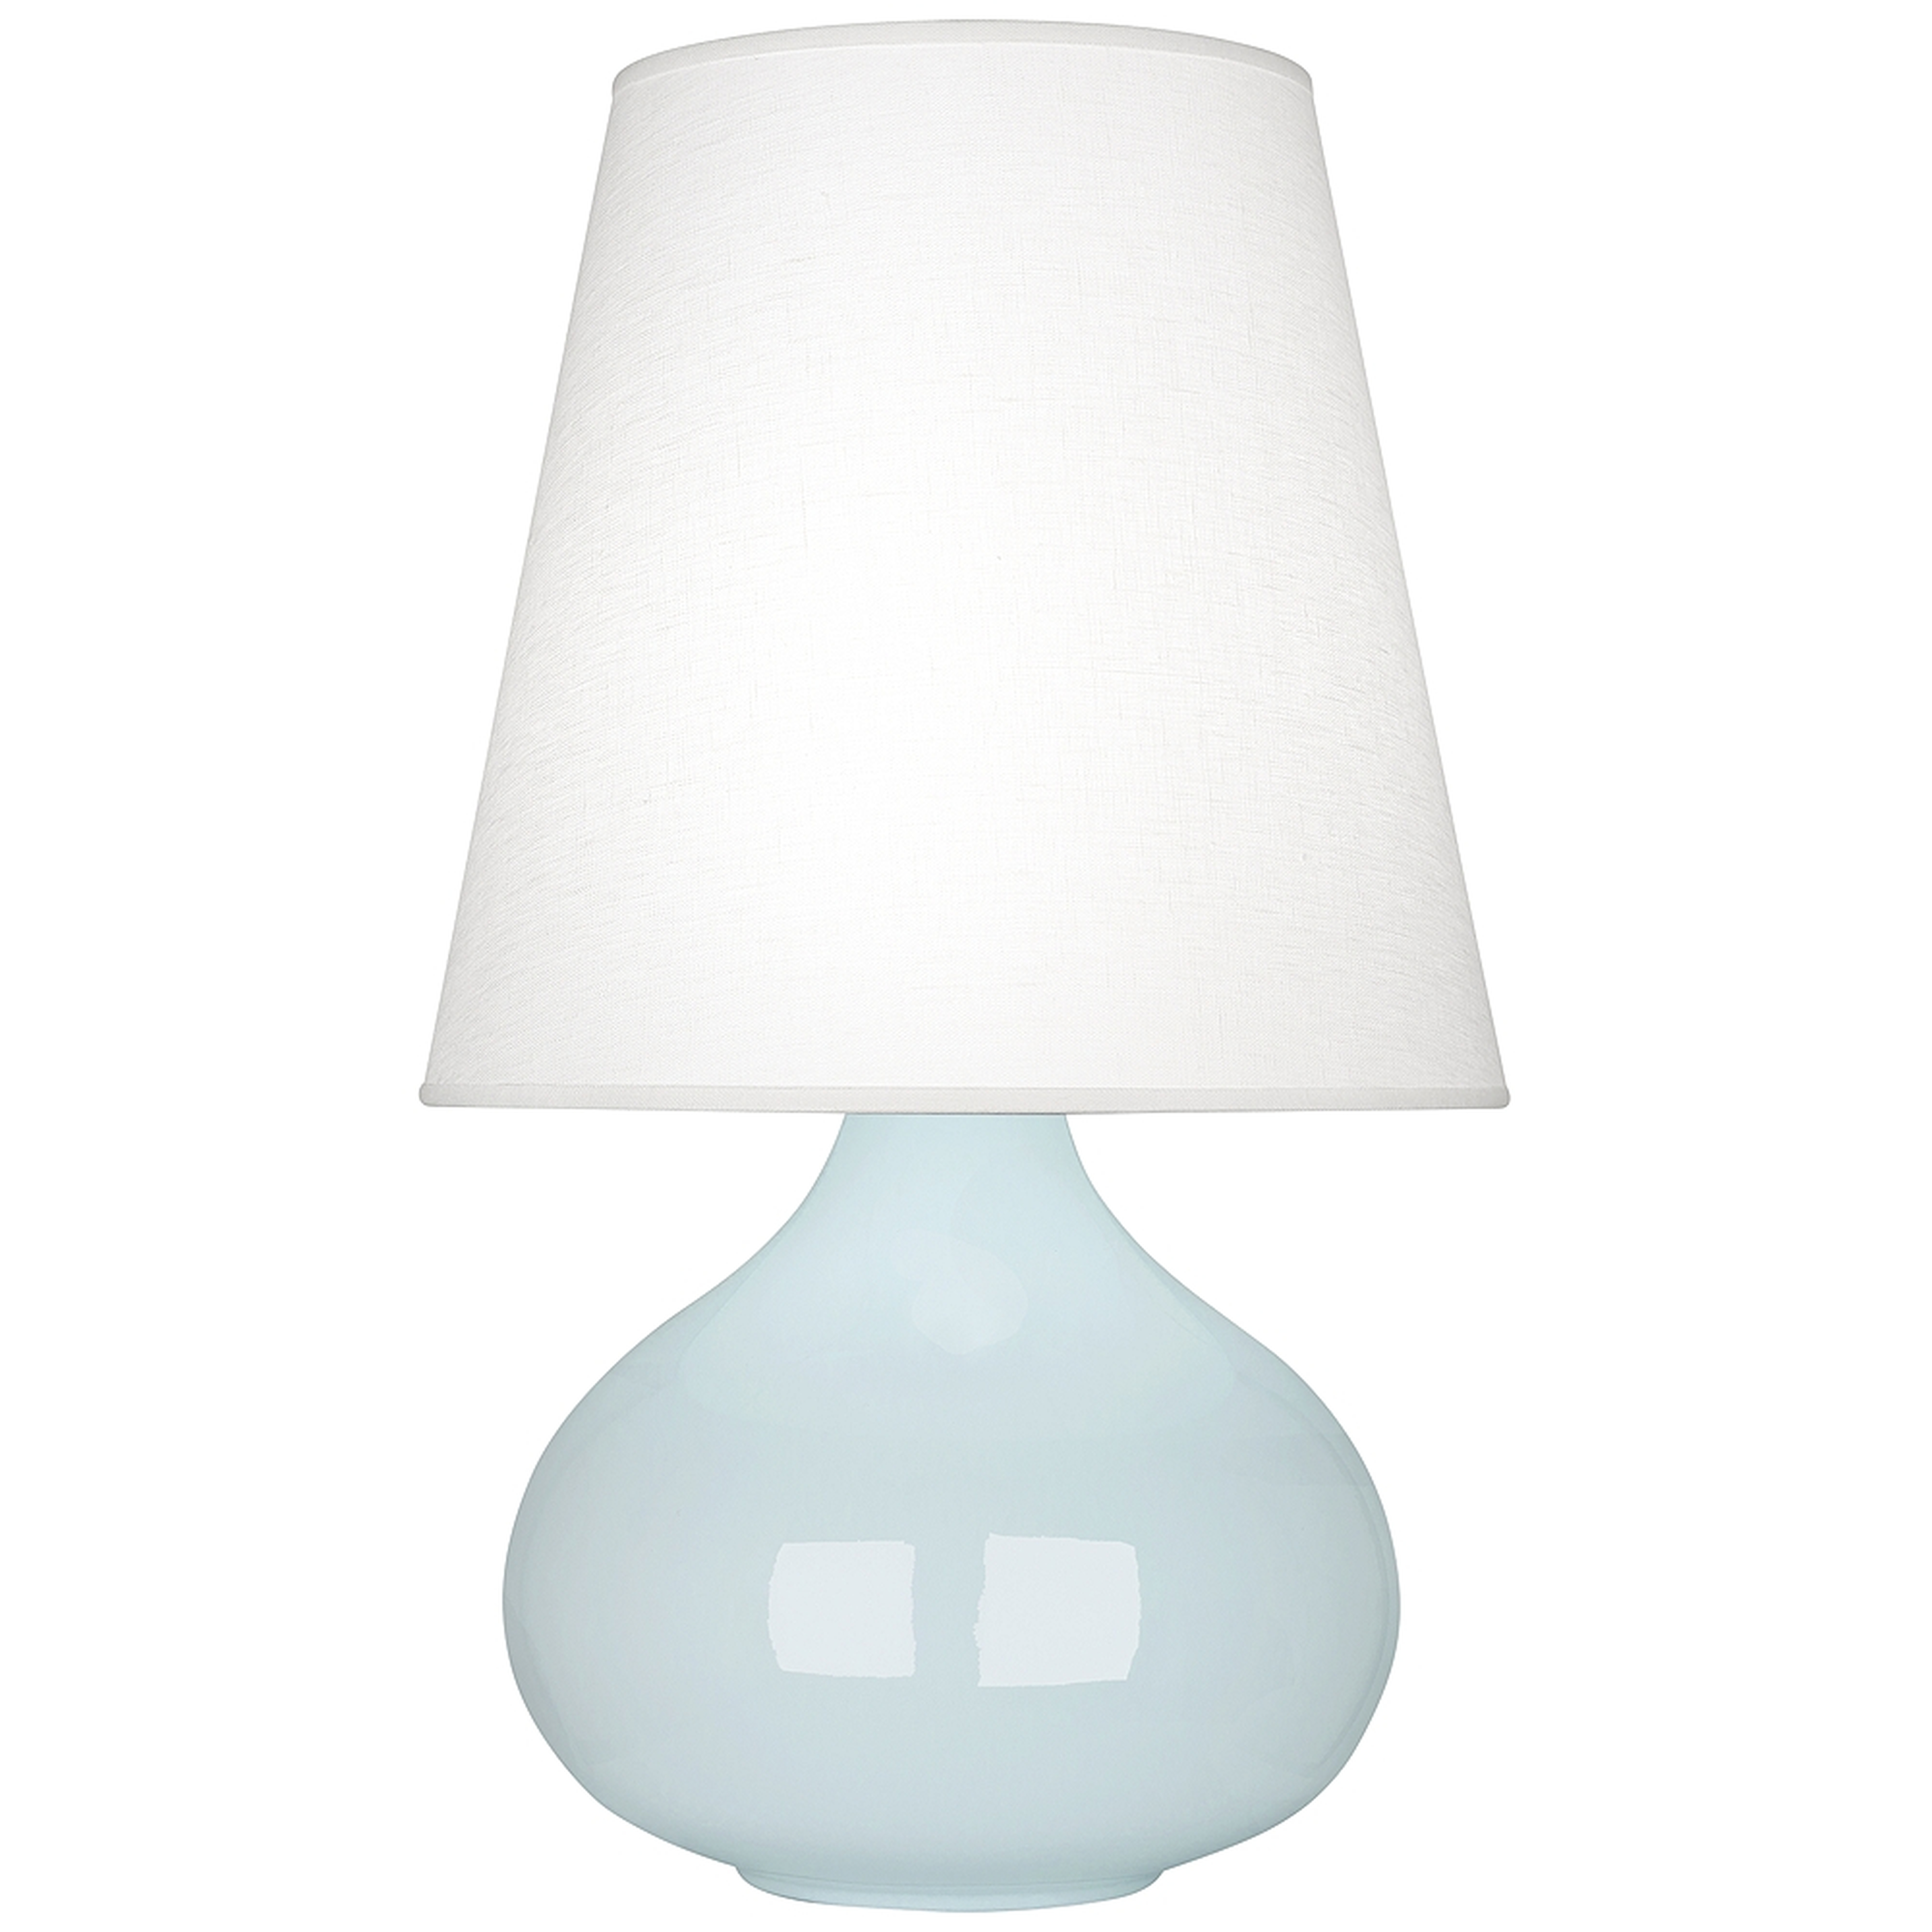 Robert Abbey June Baby Blue Table Lamp w/ Oyster Linen Shade - Style # 58A04 - Lamps Plus